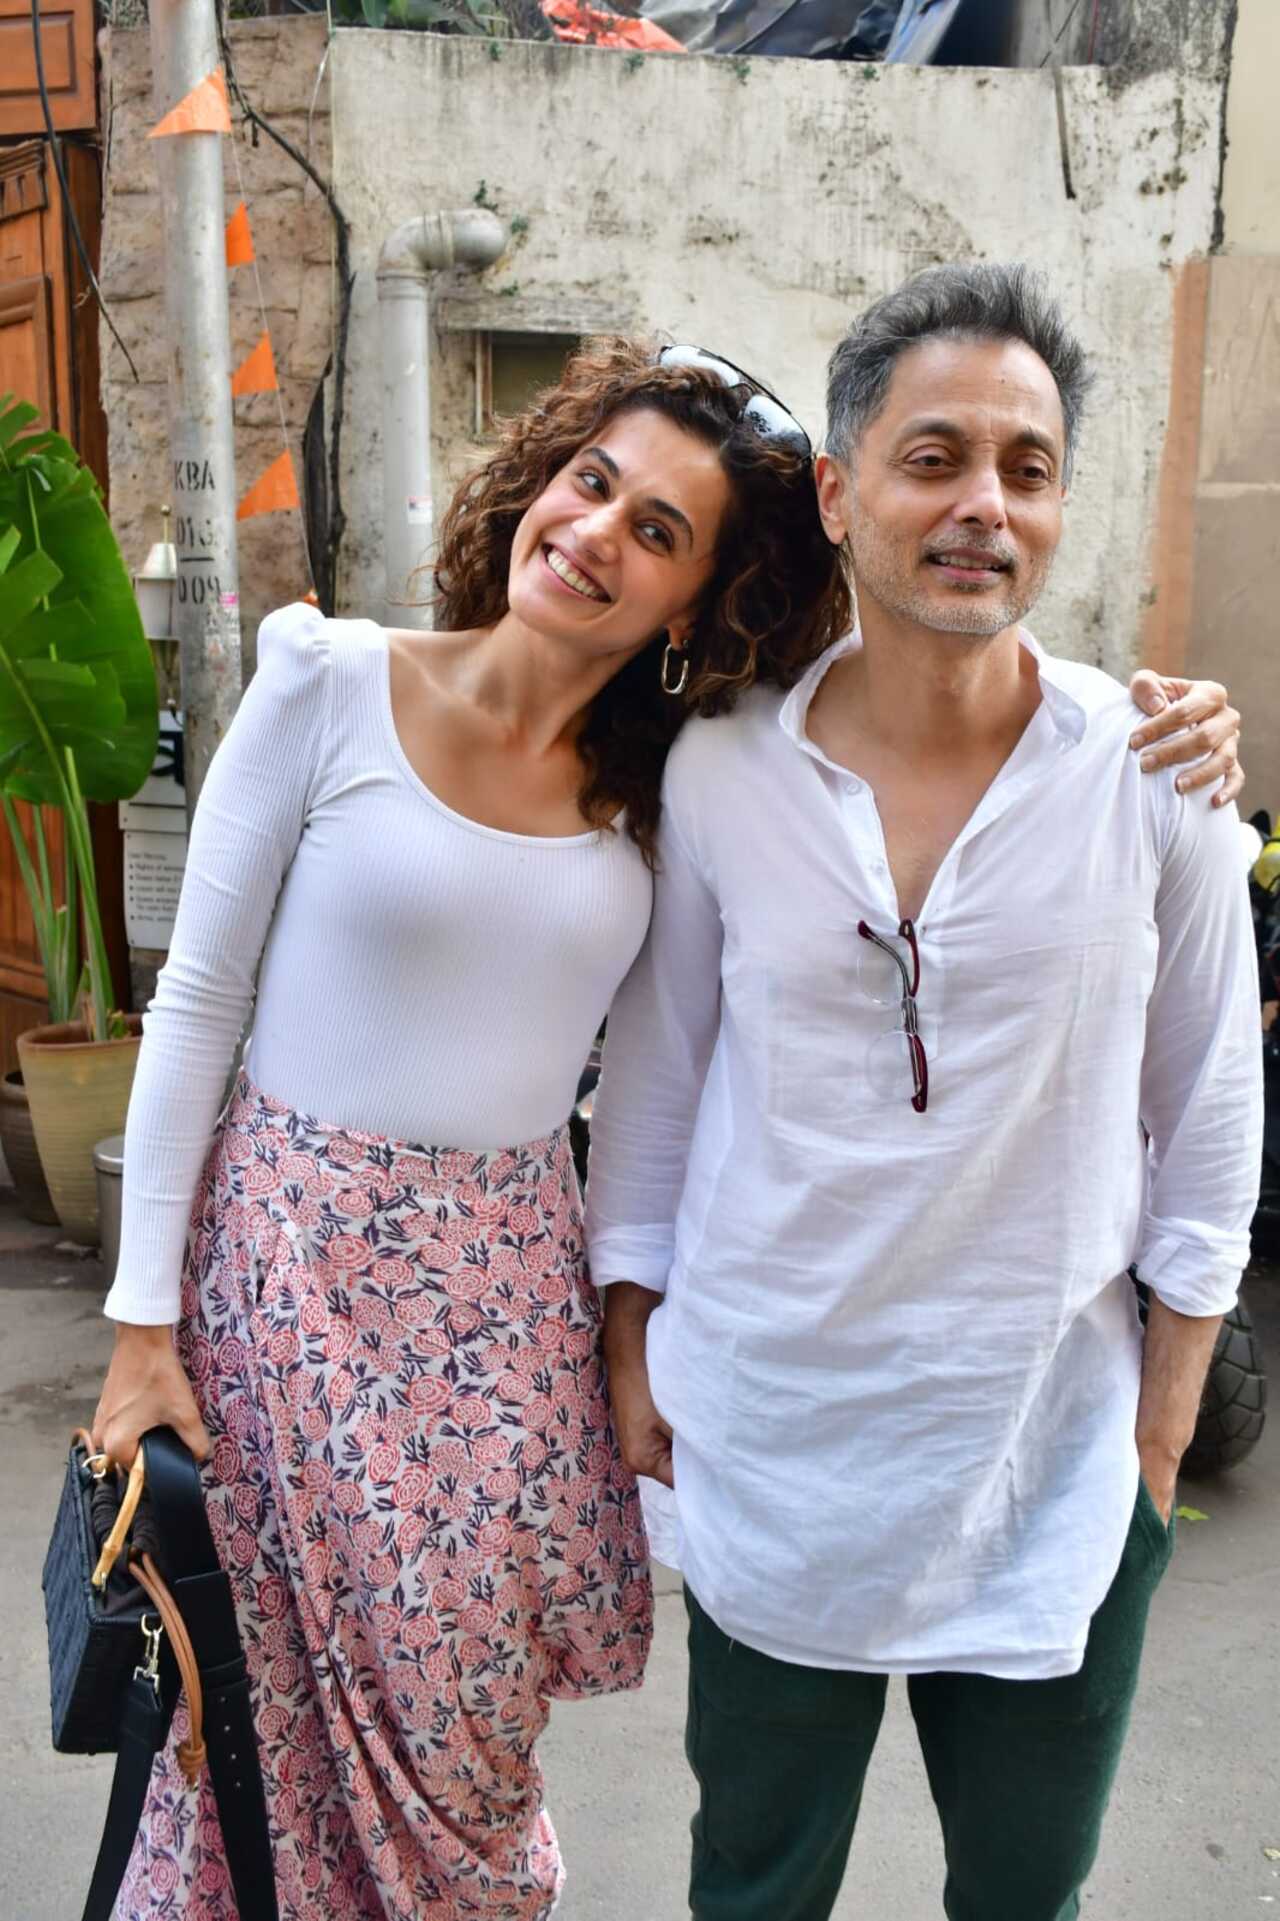 Taapsee Pannu also posed with Sujoy Ghosh and the two seemed to be in a jovial mood. Is a collaboration on the cards?